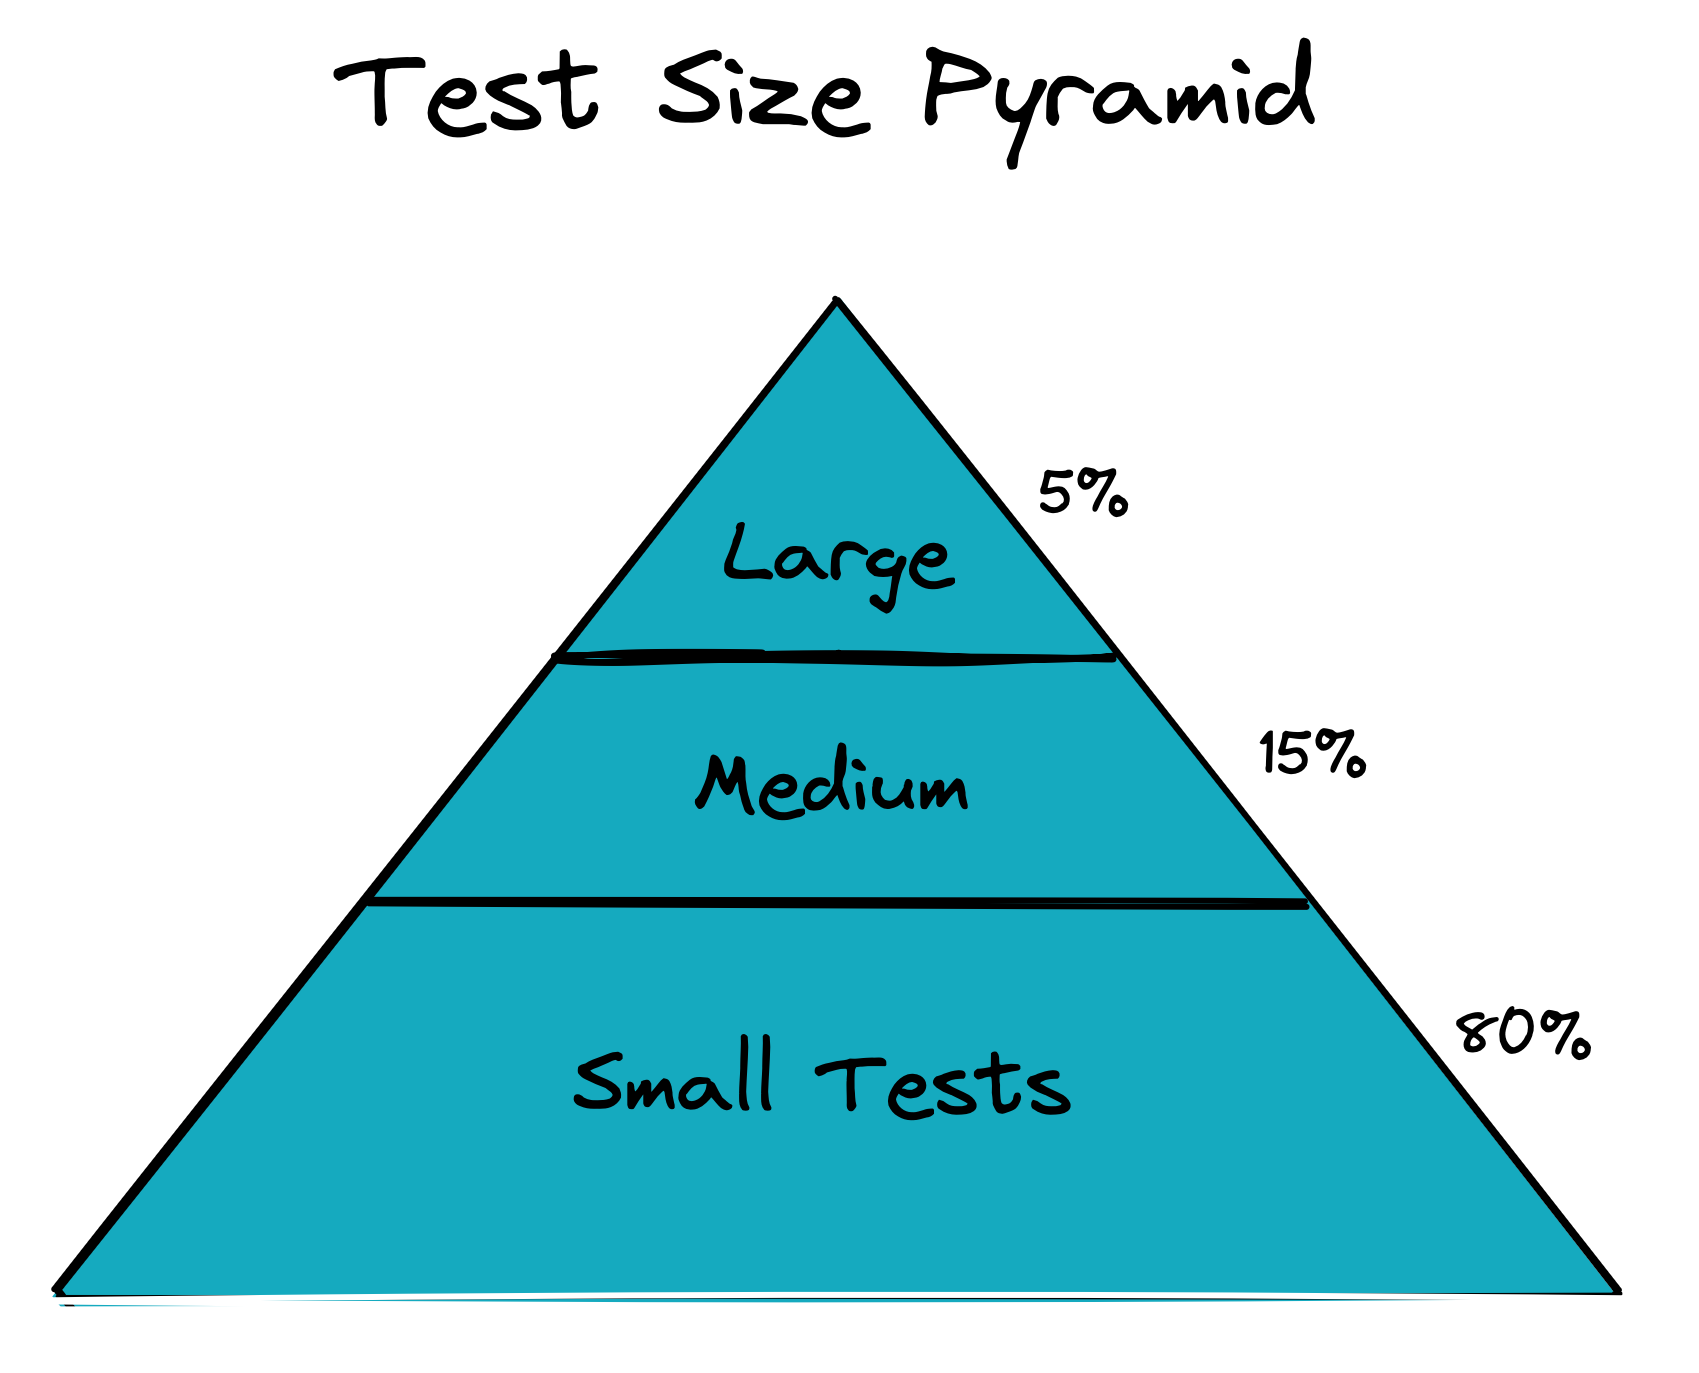 Test Size Pyramid.excalidraw.png